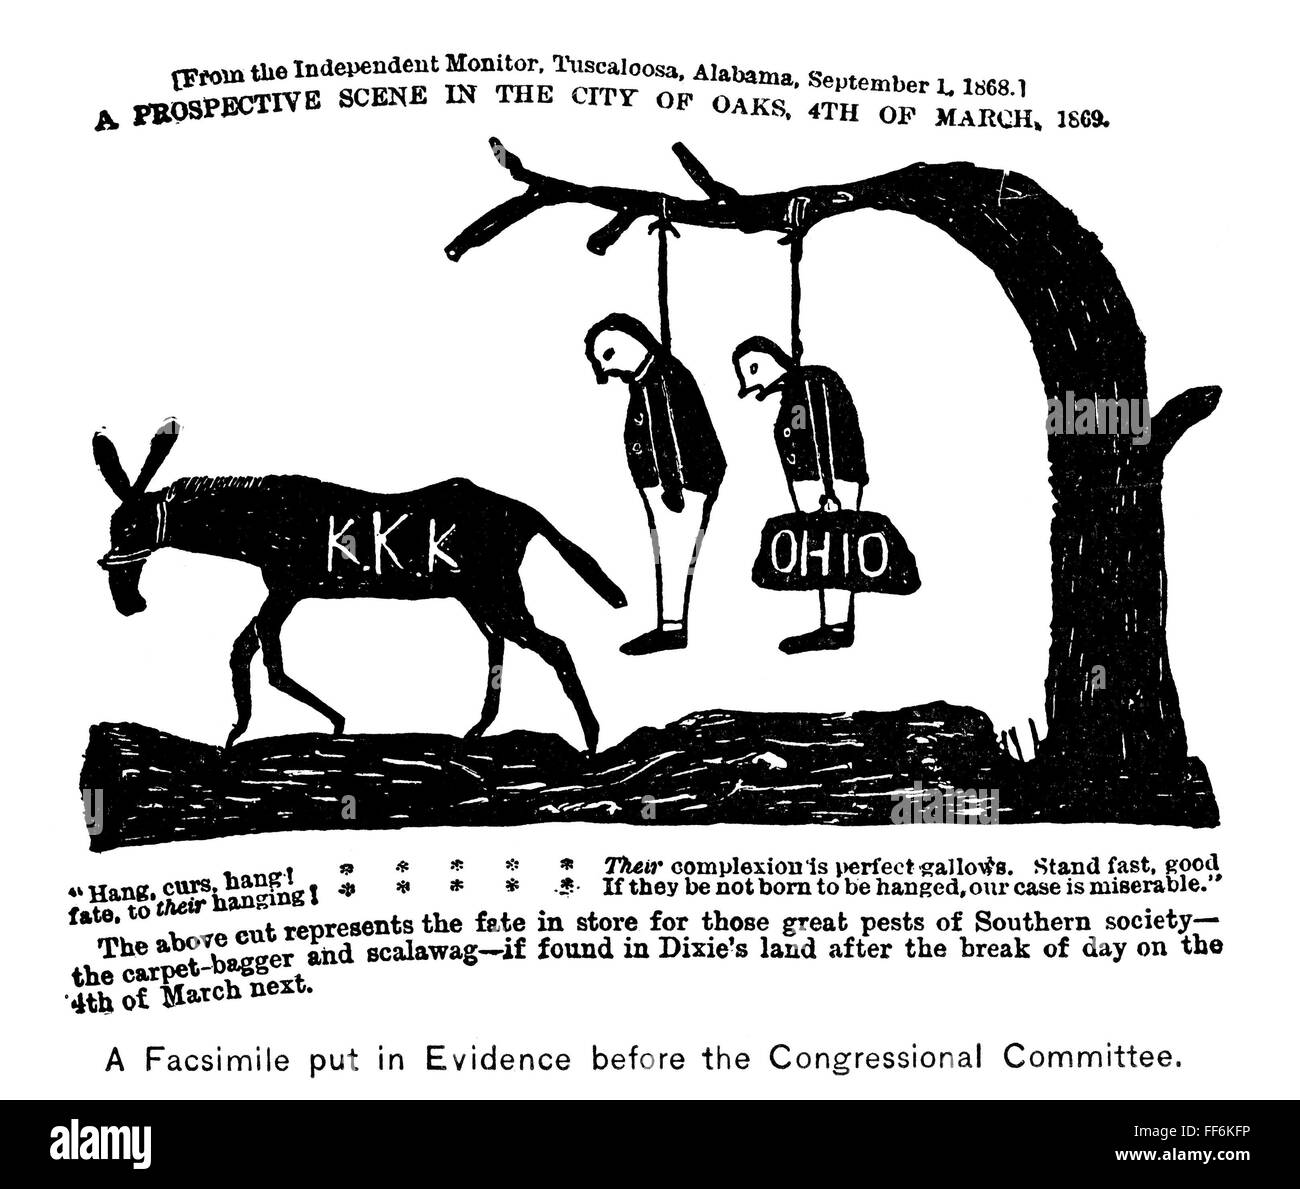 KU KLUX KLAN, 1868. /nReproduction of a KKK warning that appeared in the 'Independent Monitor,' Tuscaloosa, Alabama, 1 September 1868, and later introduced as evidence at a Congressional investigation of the Klan during the Grant administration. Stock Photo